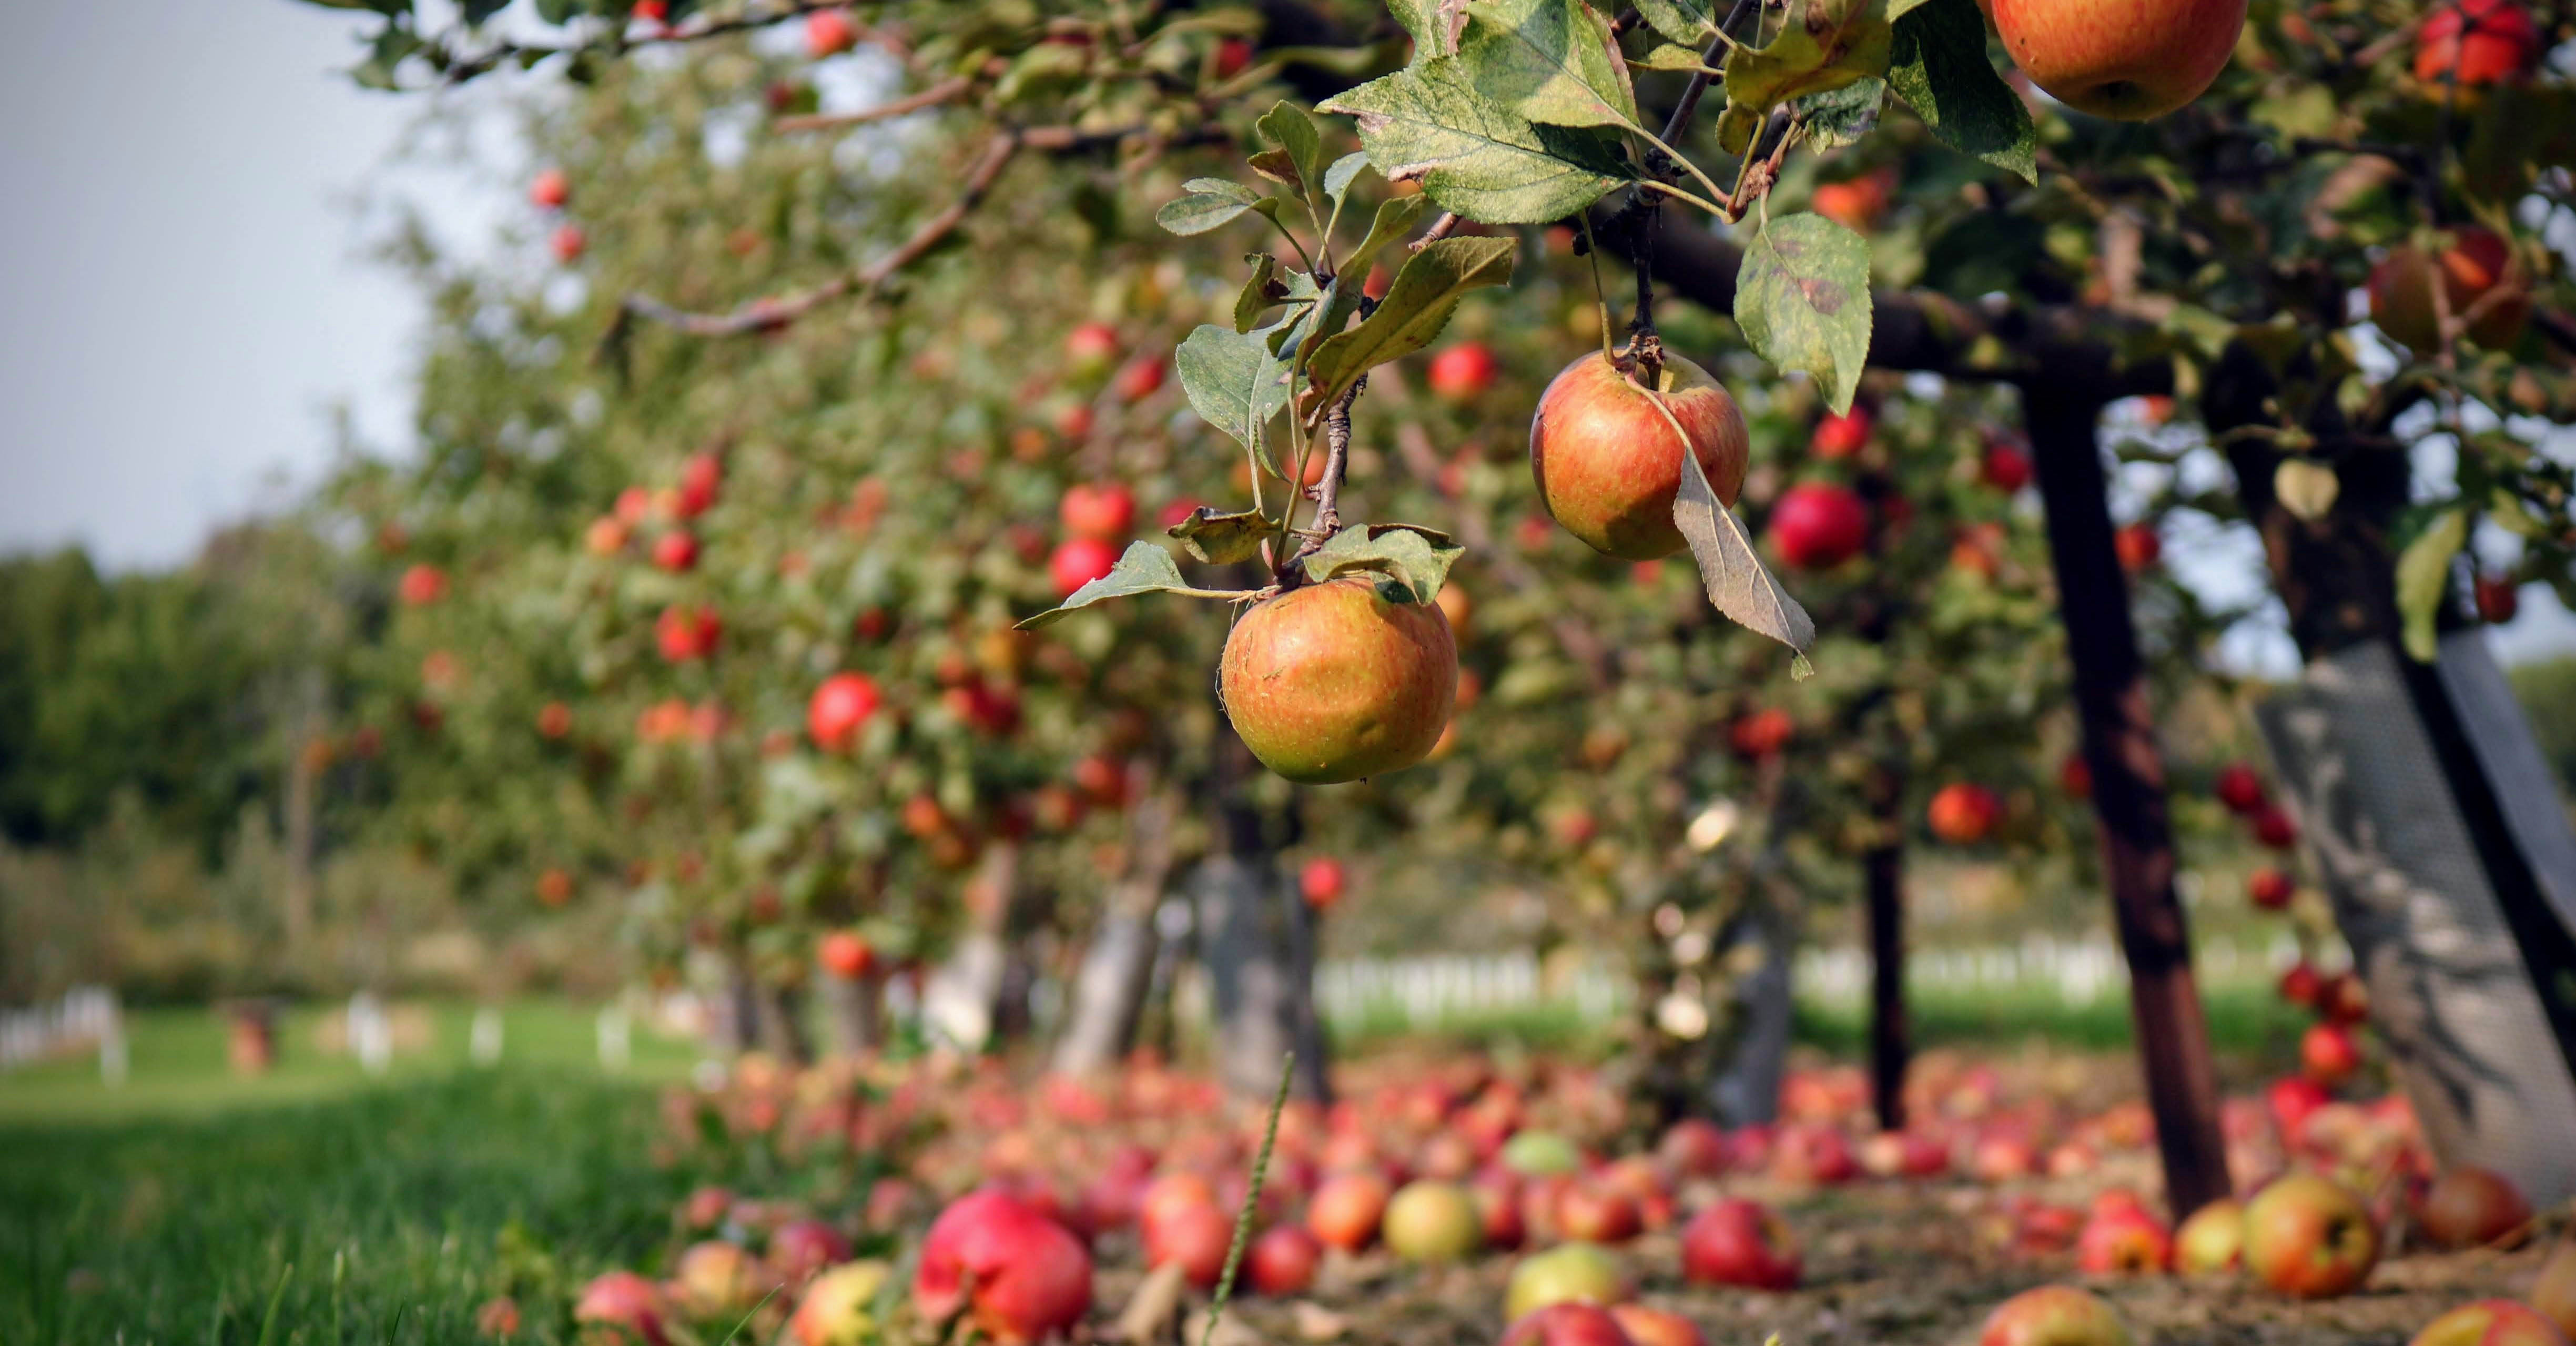 An image of an apple orchard.